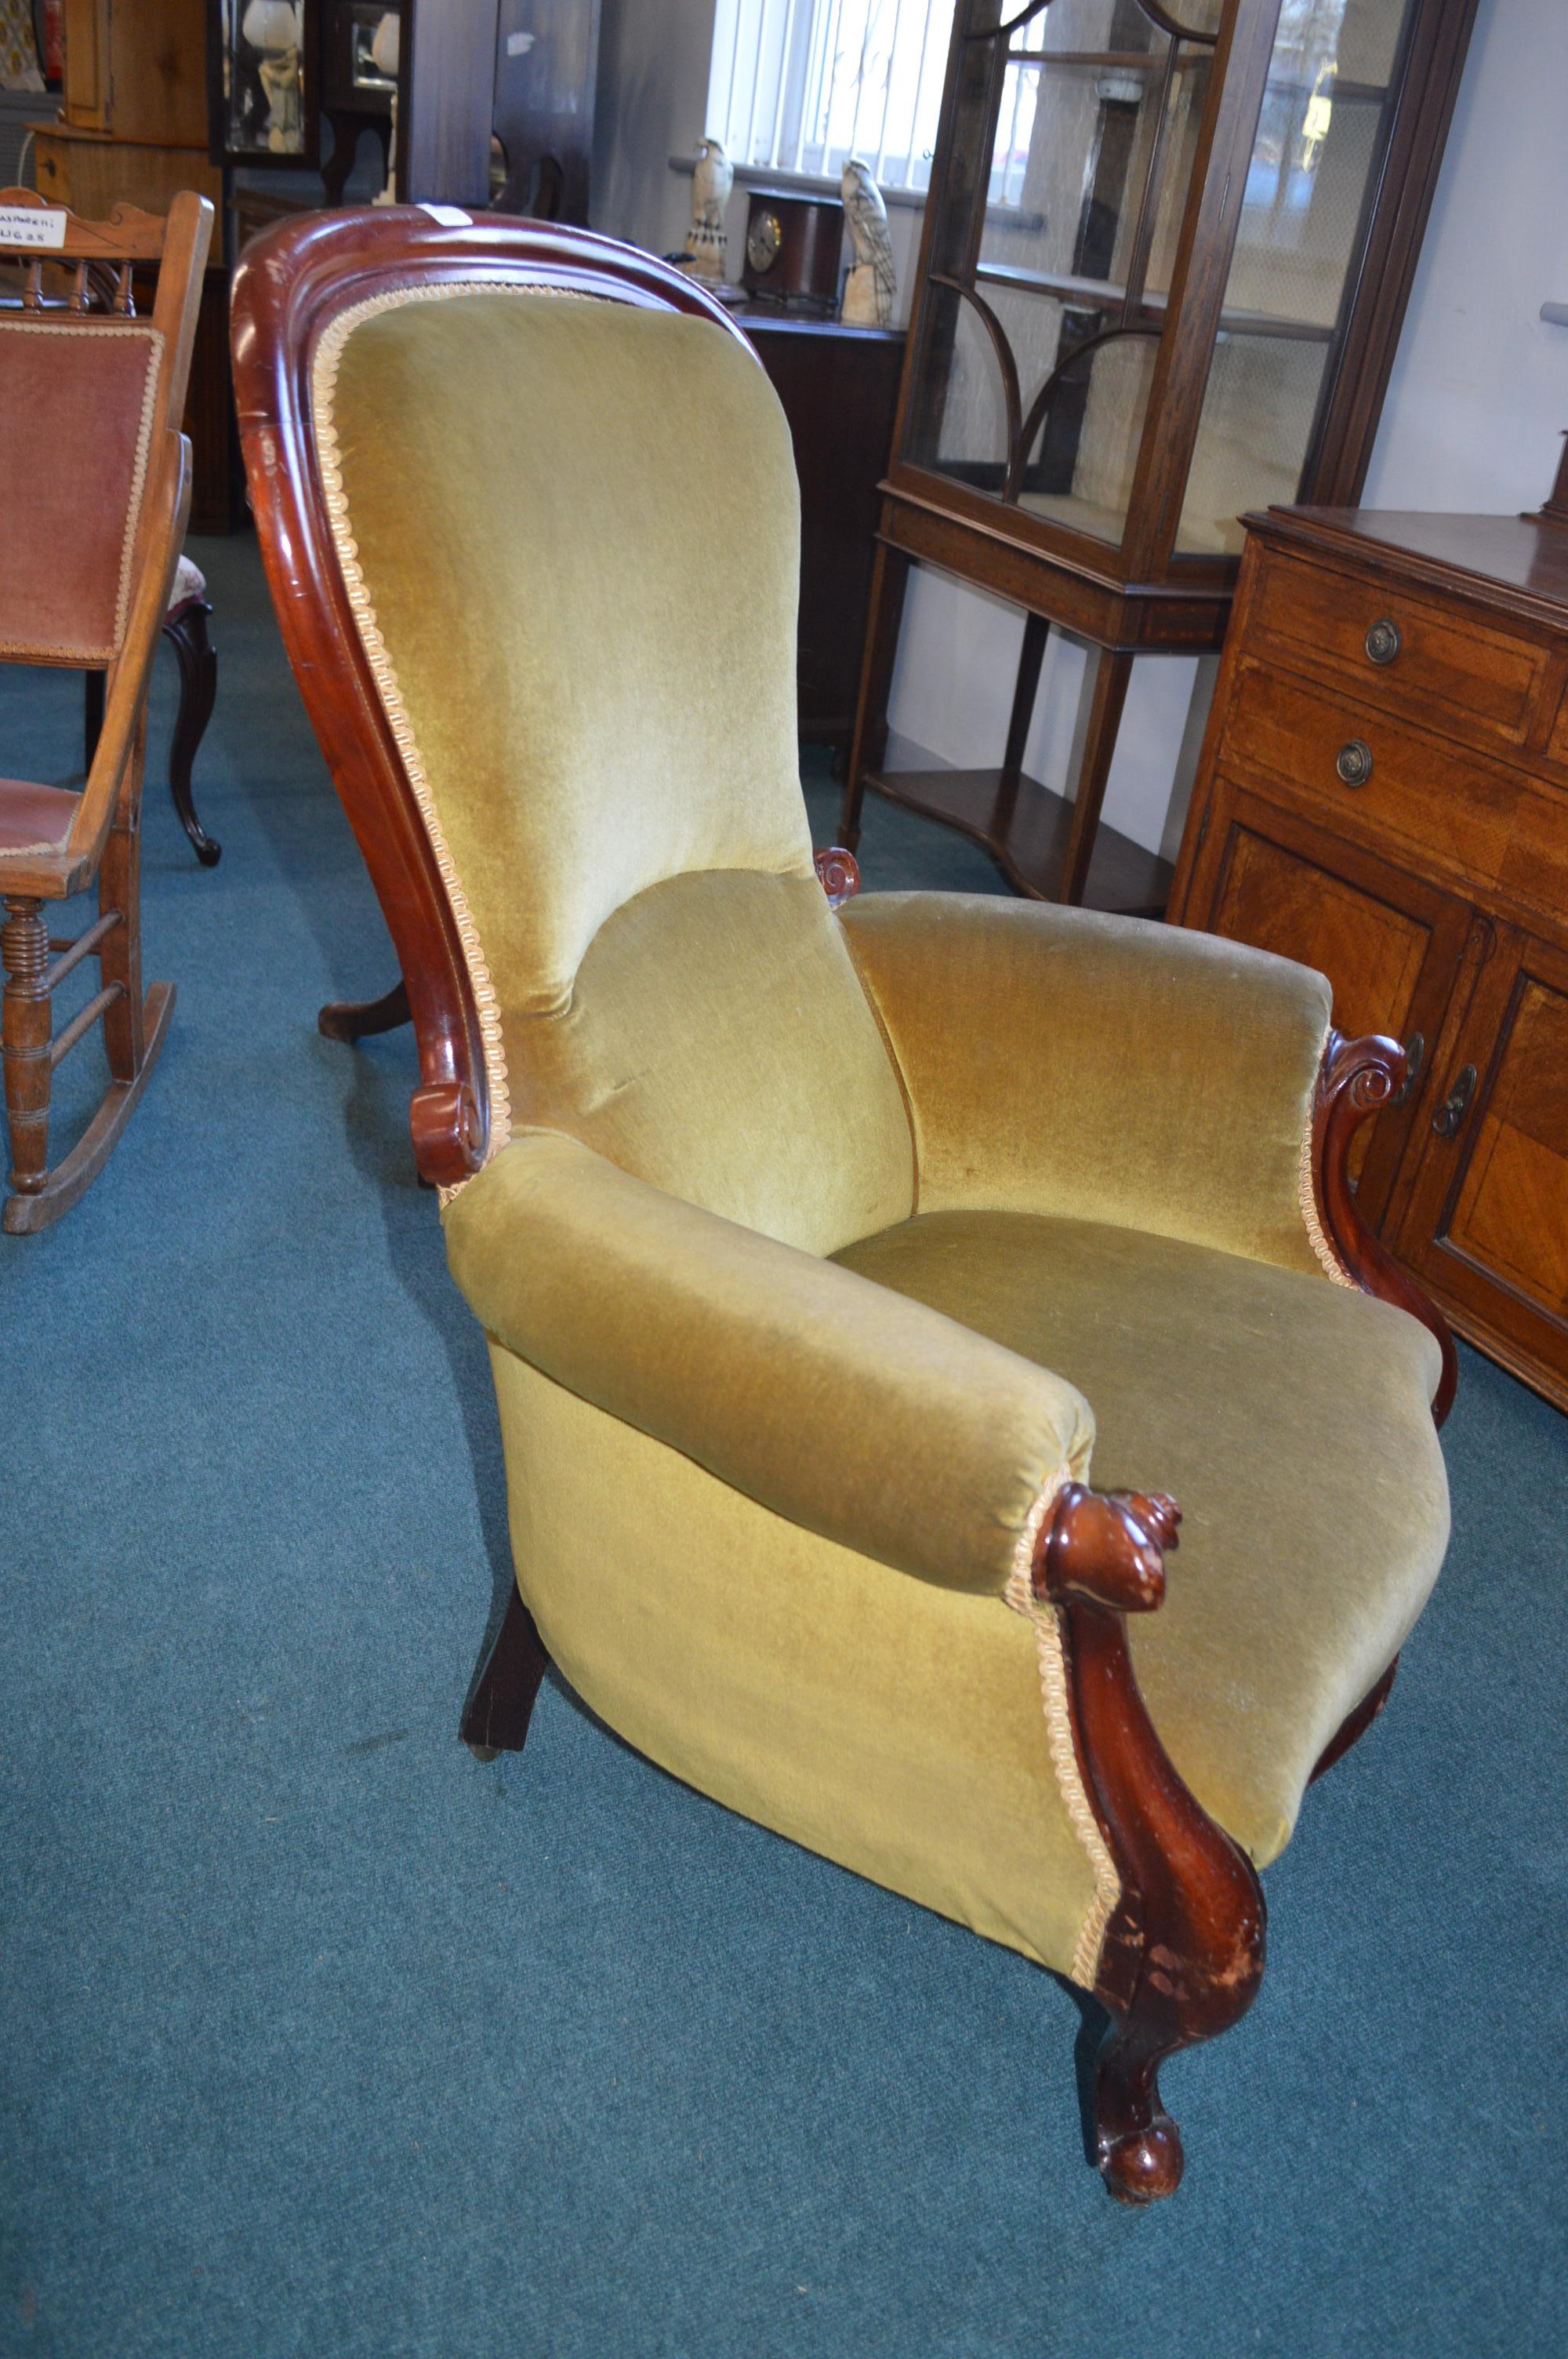 Victorian Nursing Chair with Mustard Upholstery - Image 2 of 2